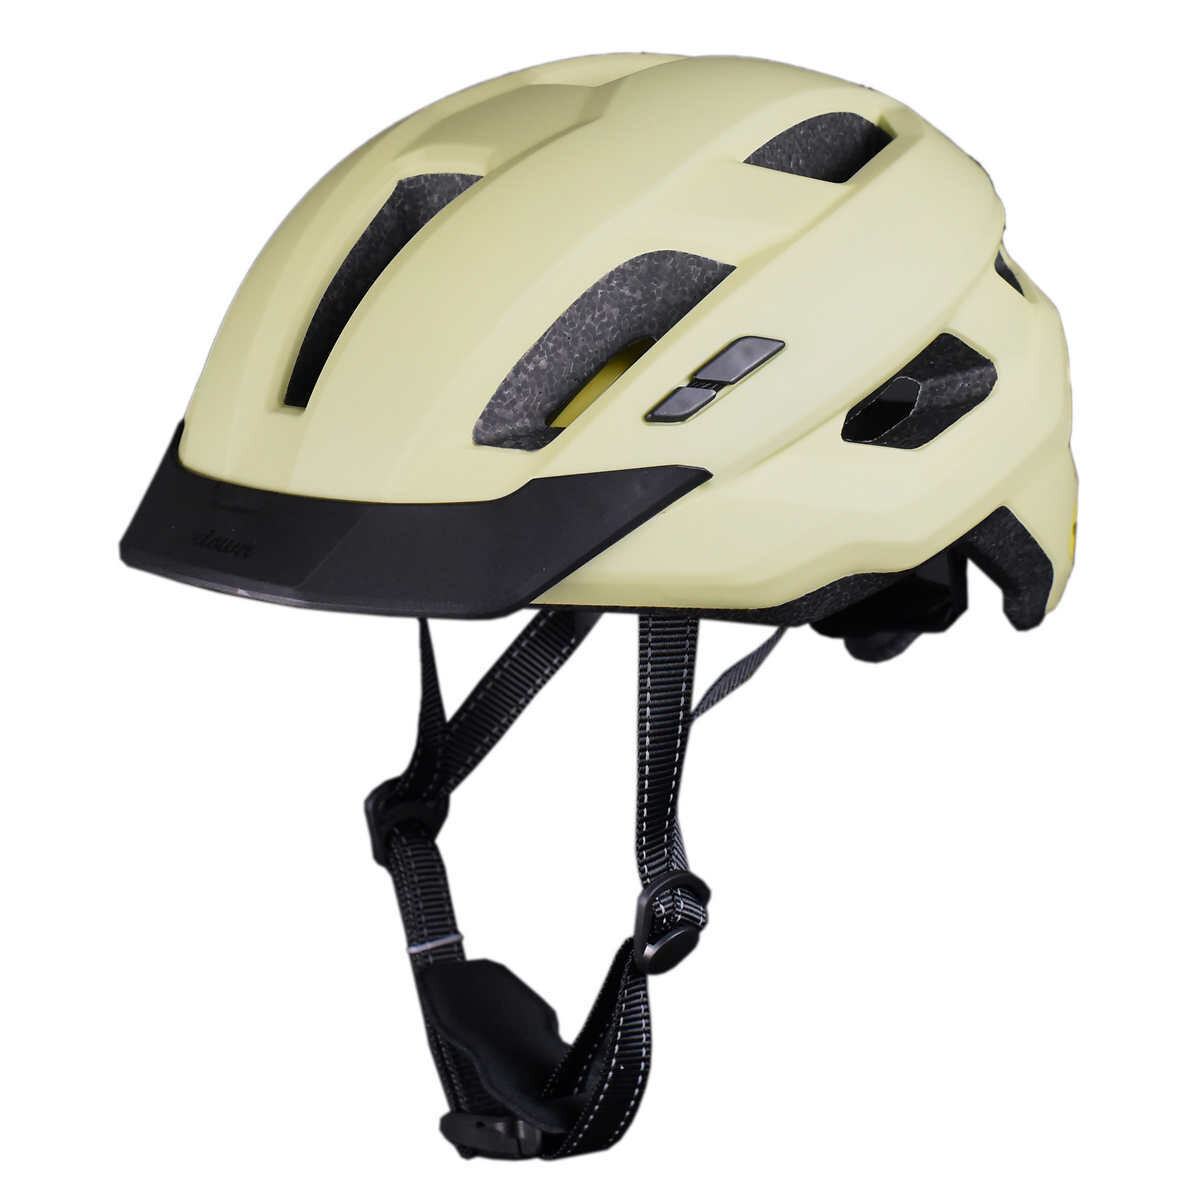 Freetown Gear and Gravel Lumiere Adult Helmet with MIPS Safety System Colour: Green